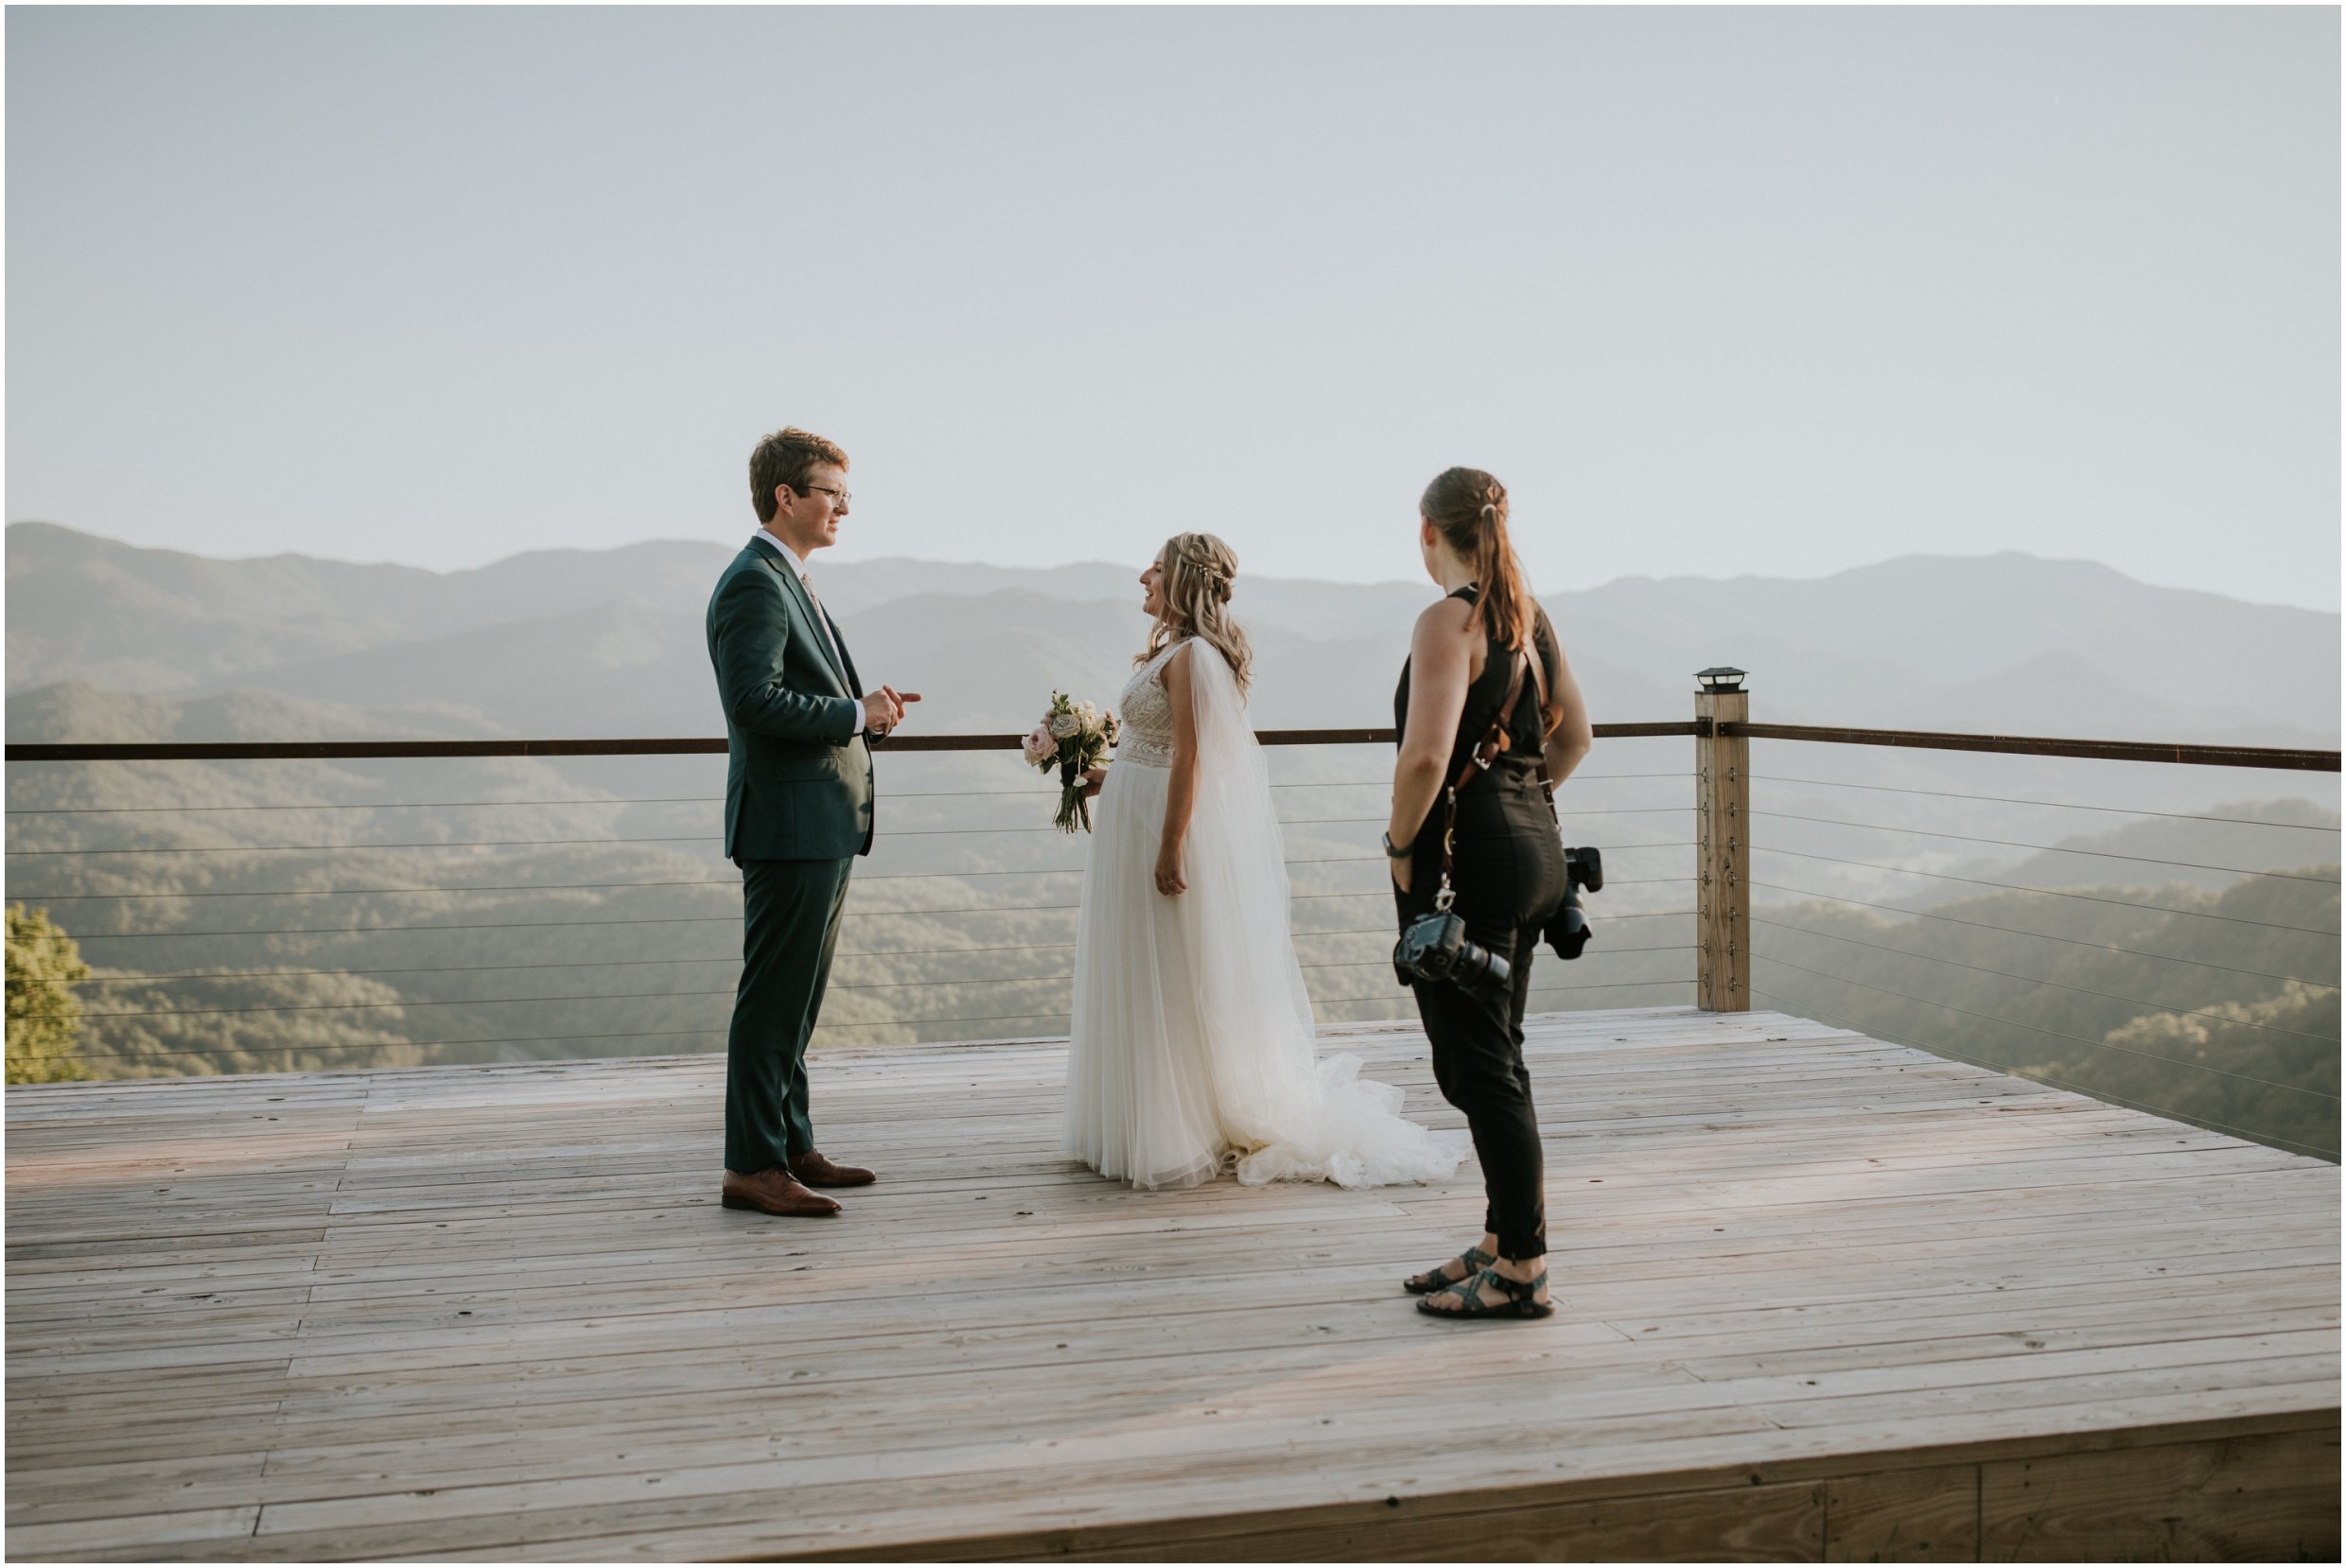 Taking in the view from the Parker Mill's mountaintop platform for bride and groom portraits!